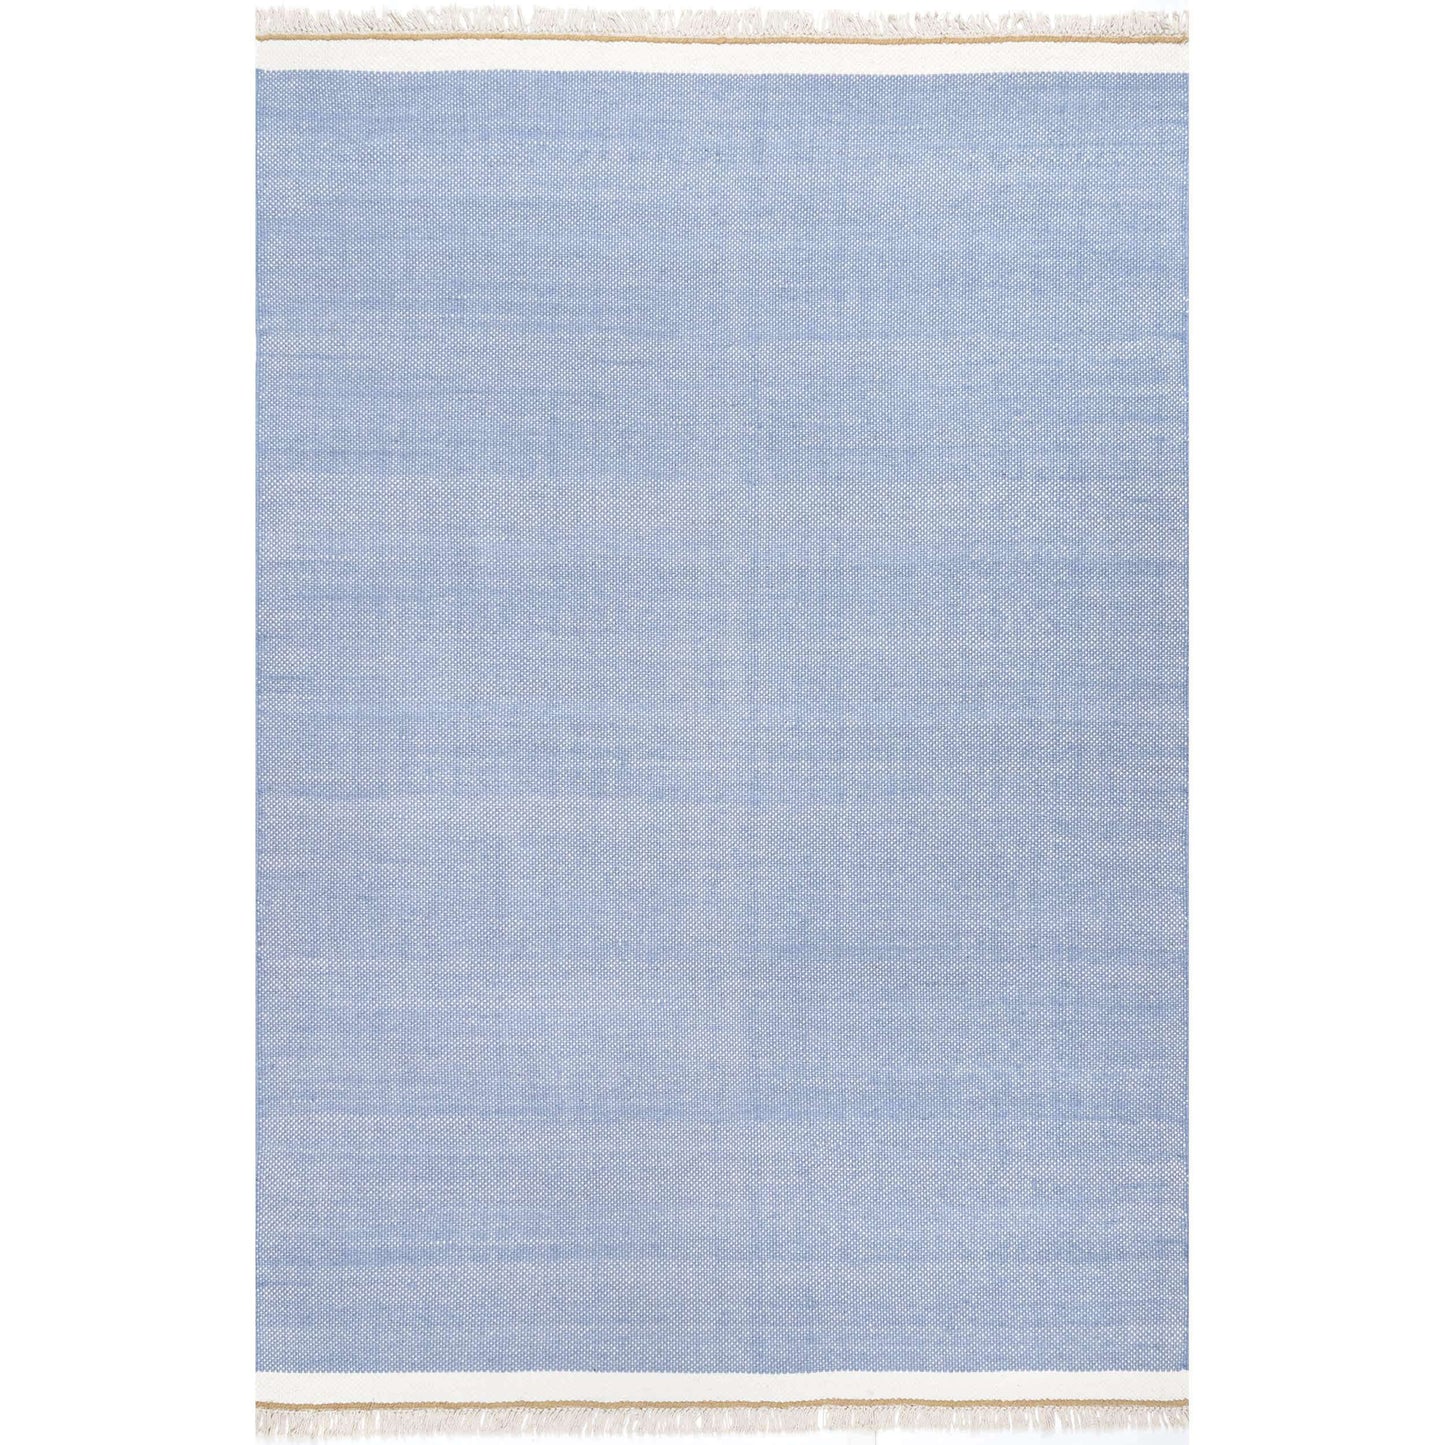 Blue Wool Cotton Rug with Tassels